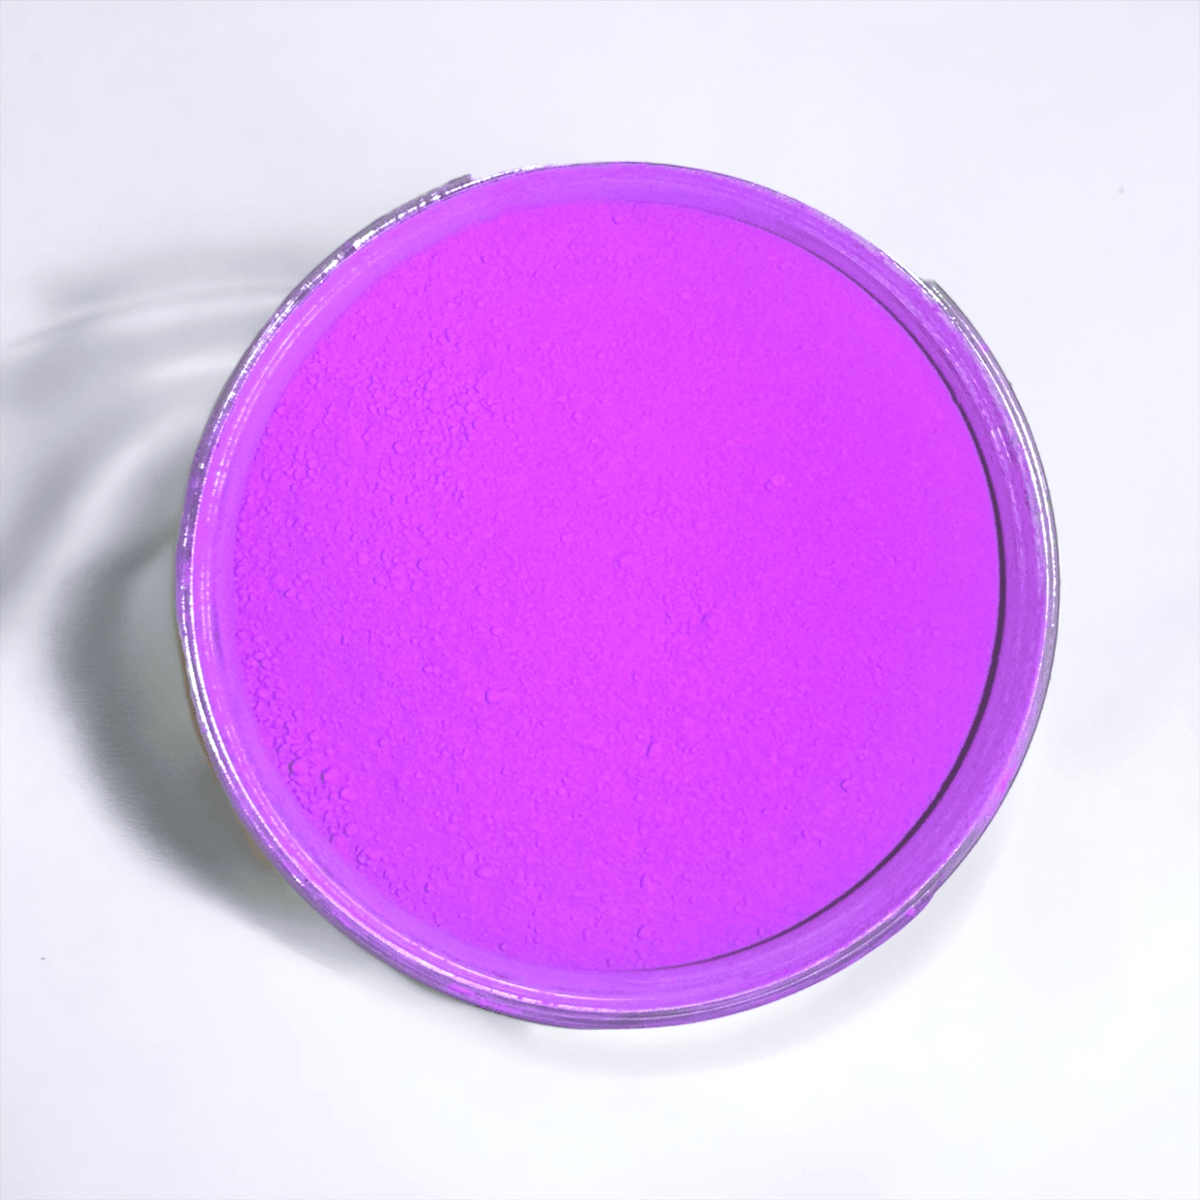 Galactic Purple Mica Powder - Craftiful Fragrance Oils - Supplies for Wax Melts, Candles, Room Sprays, Reed Diffusers, Bath Bombs, Soaps, Perfumes, Bath Salts and Body Sprays